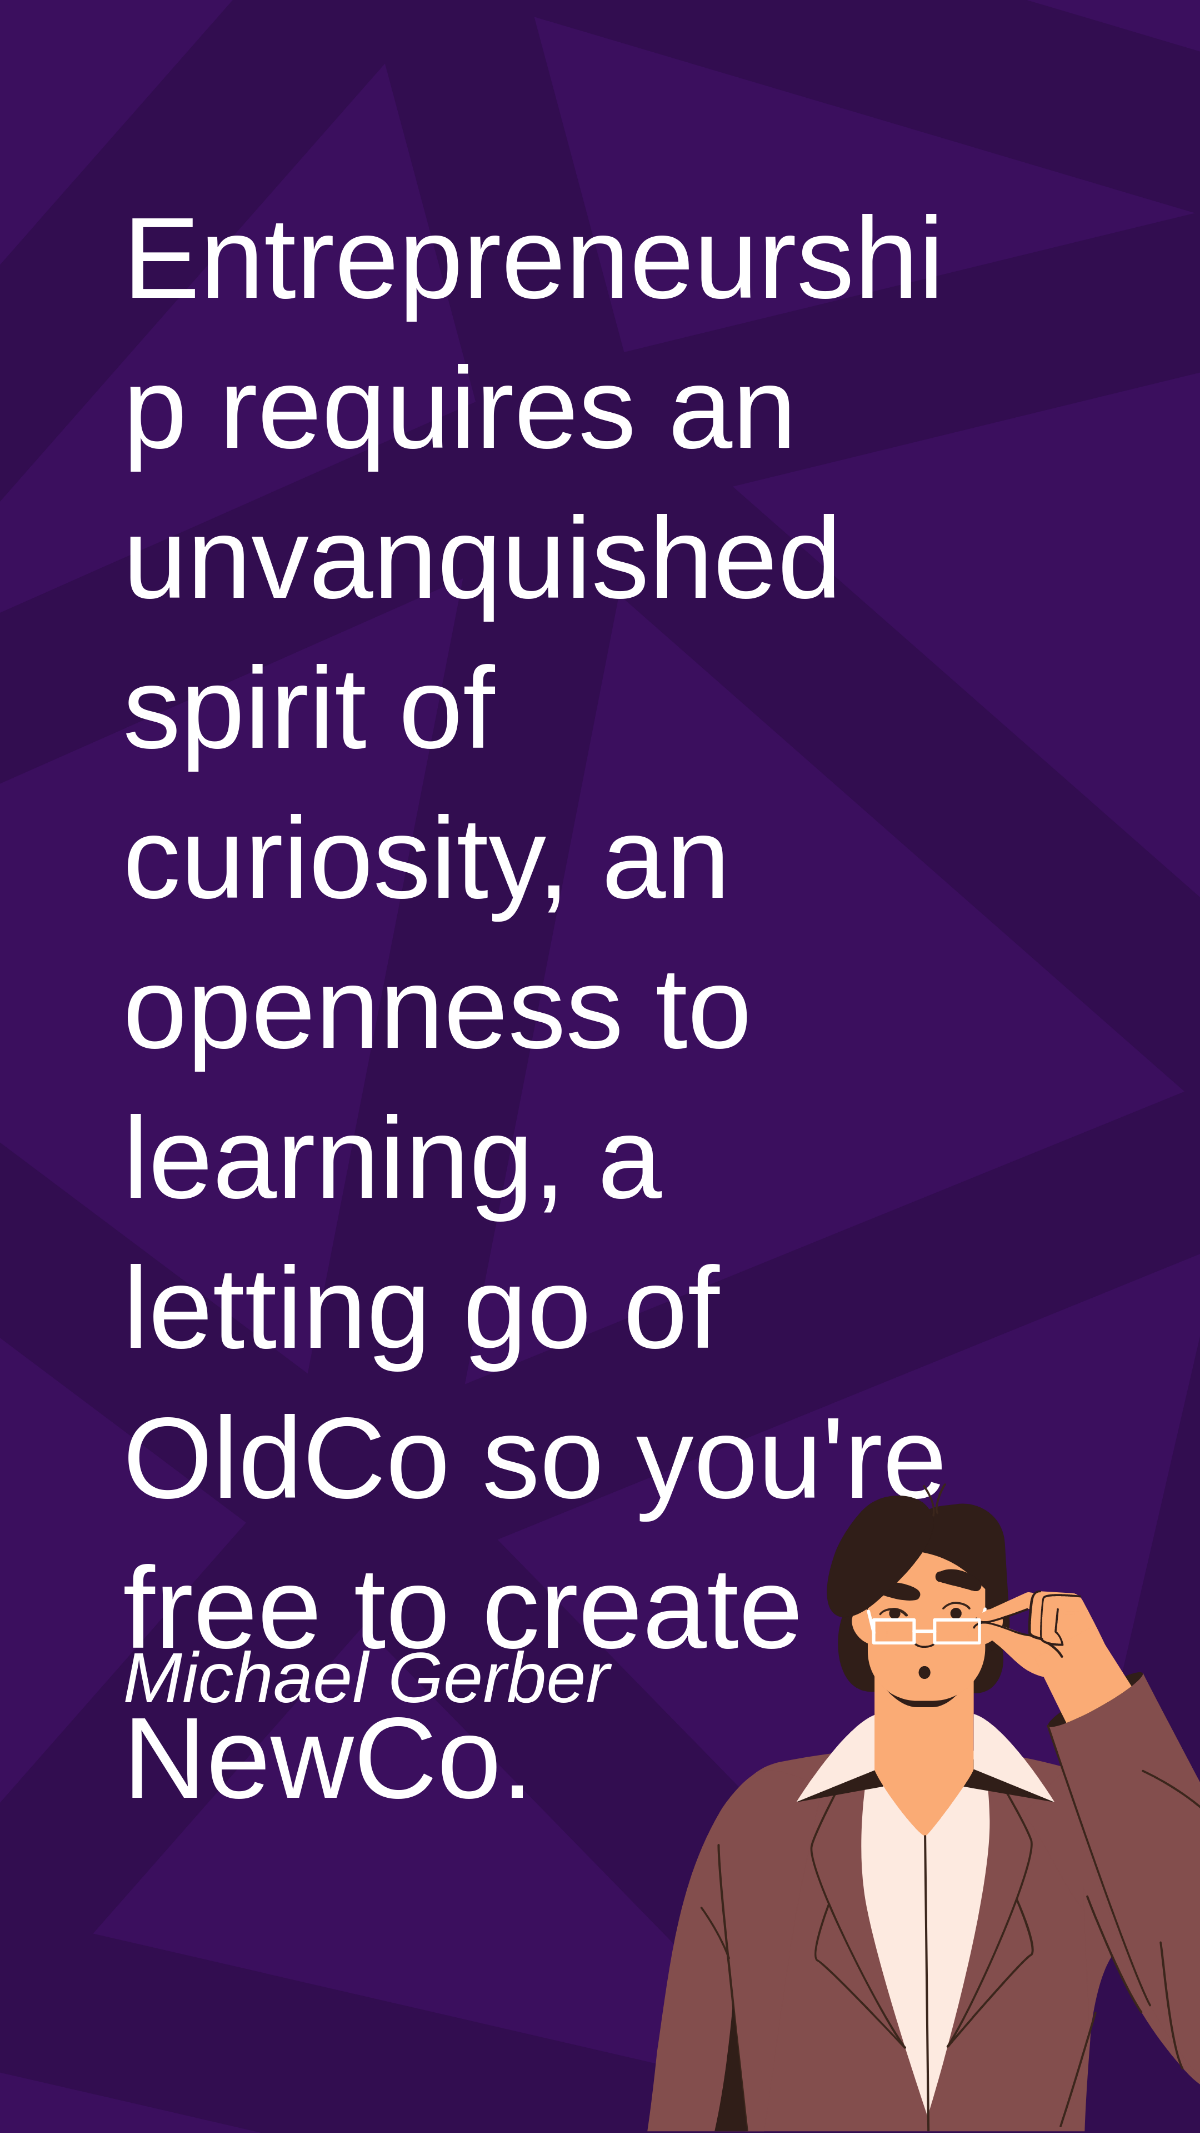 Michael Gerber - Entrepreneurship requires an unvanquished spirit of curiosity, an openness to learning, a letting go of OldCo so you're to create NewCo. Template